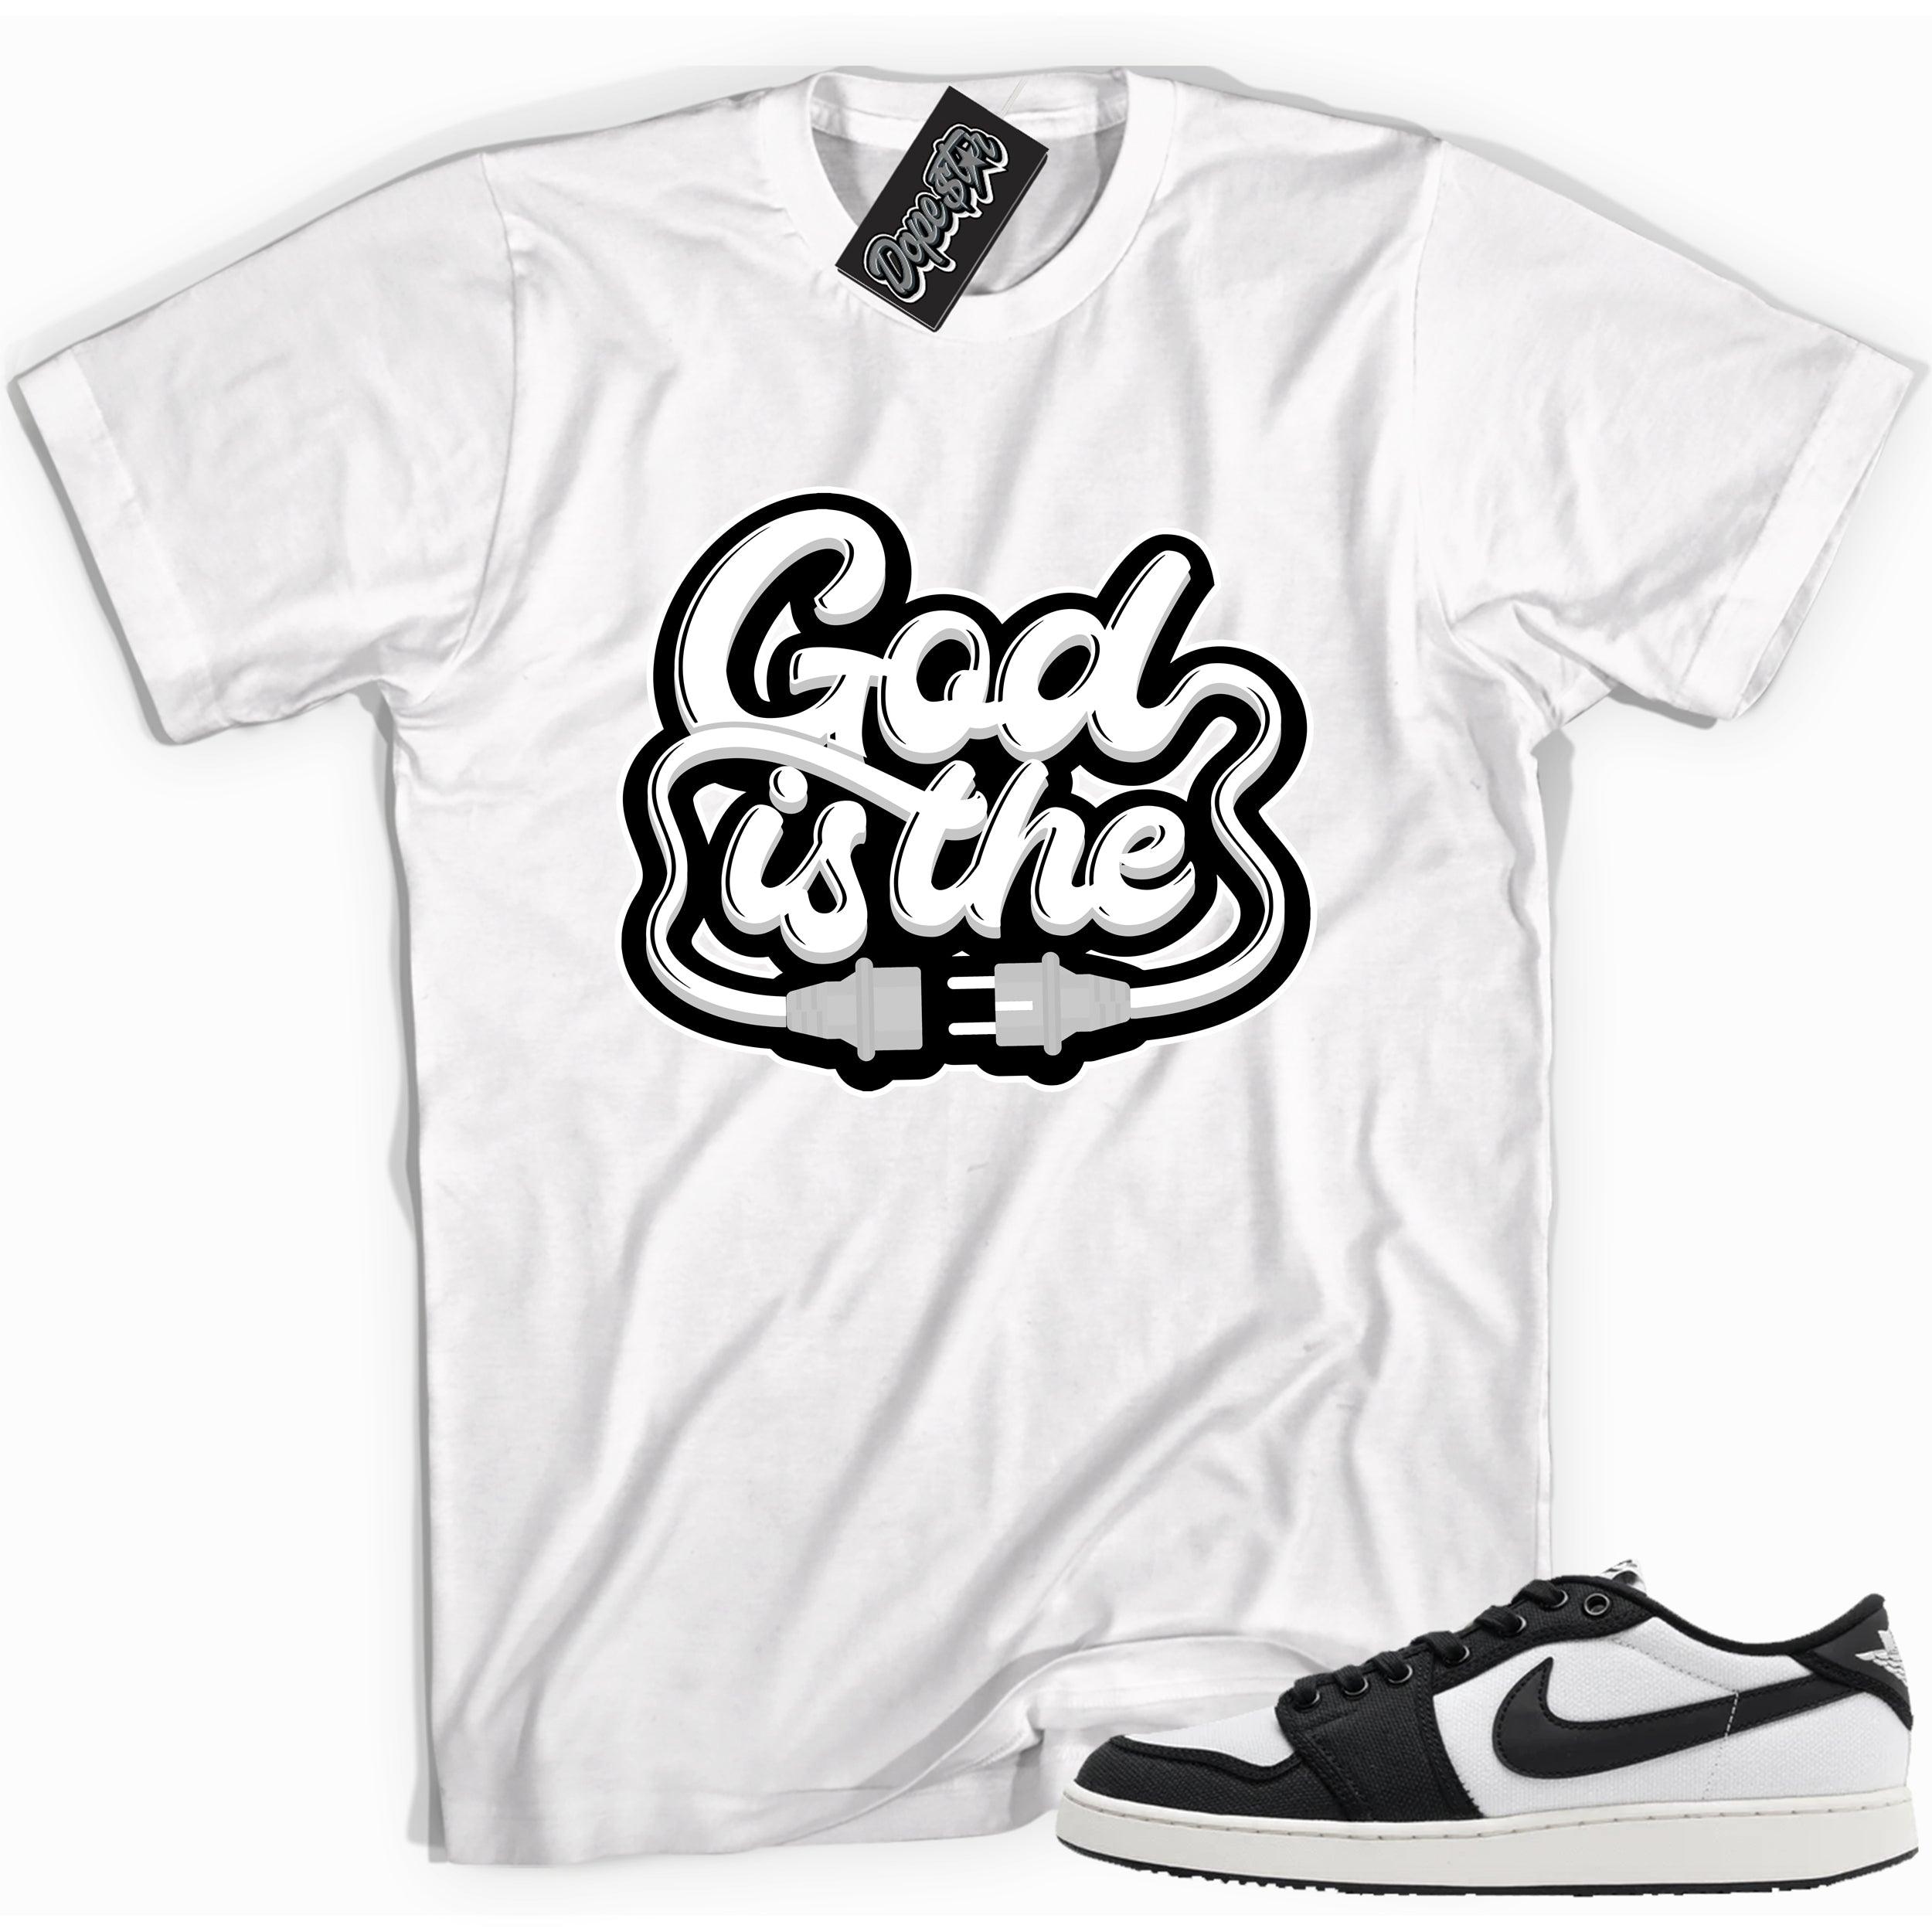 Cool white graphic tee with 'god is the plug' print, that perfectly matches Air Jordan 1 Retro Ajko Low Black & White sneakers.